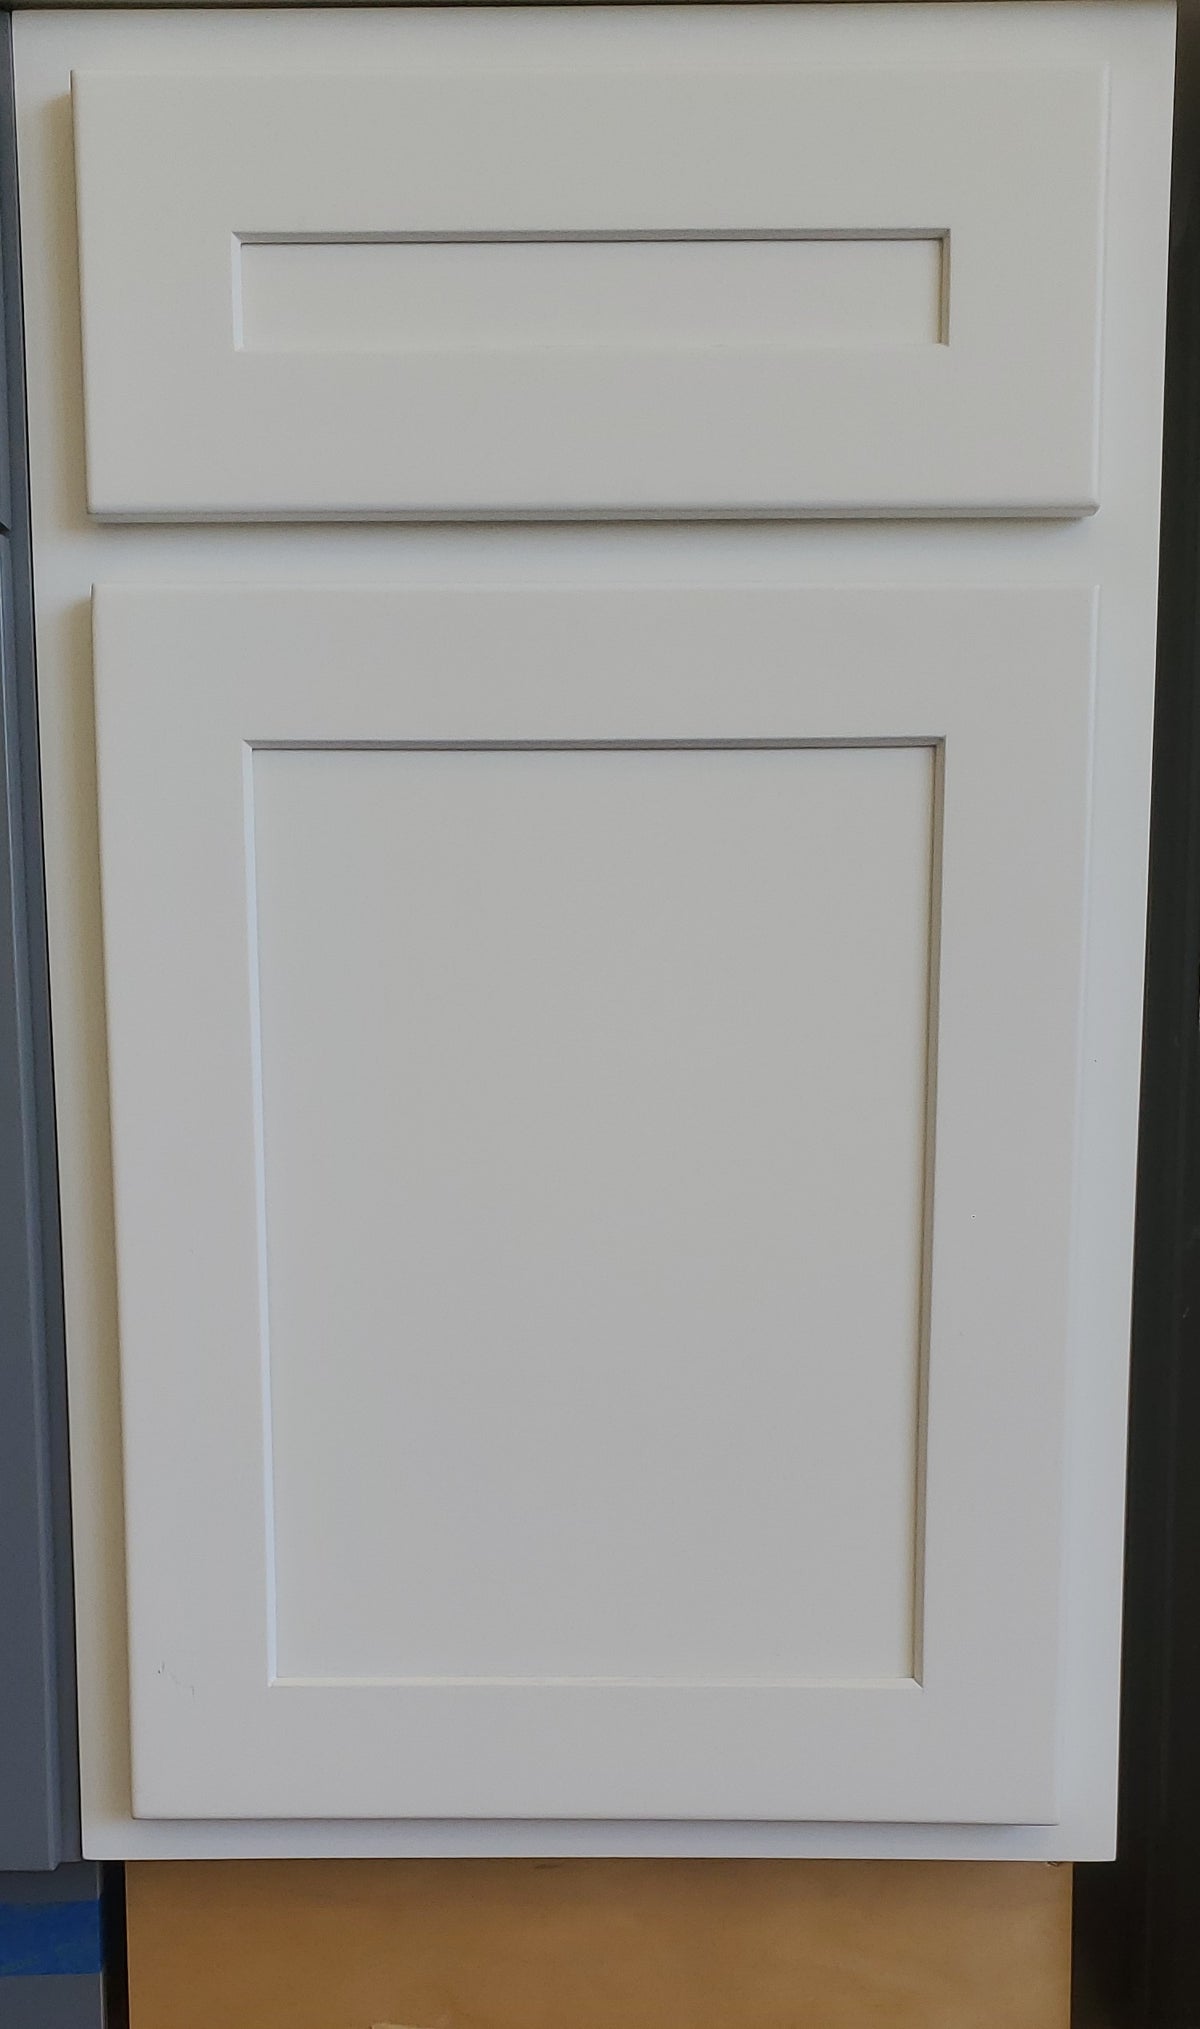 30" Tall White Shaker 1/2" Overlay Wall Cabinet - Single Door 9", 12", 15", 18", 21" WIde